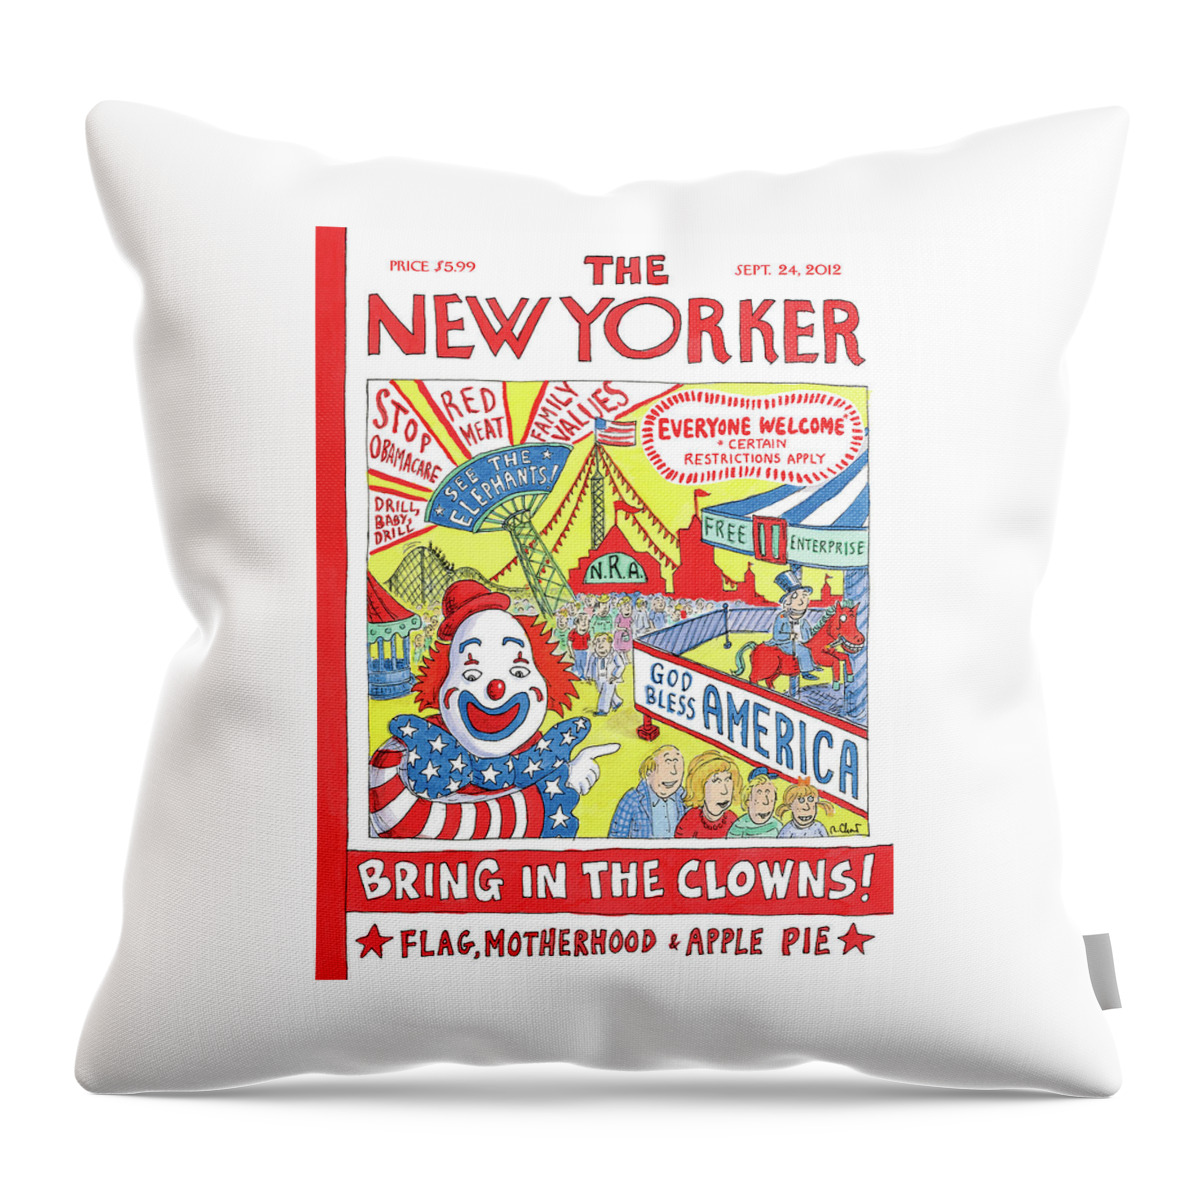 Bring In The Clowns Throw Pillow